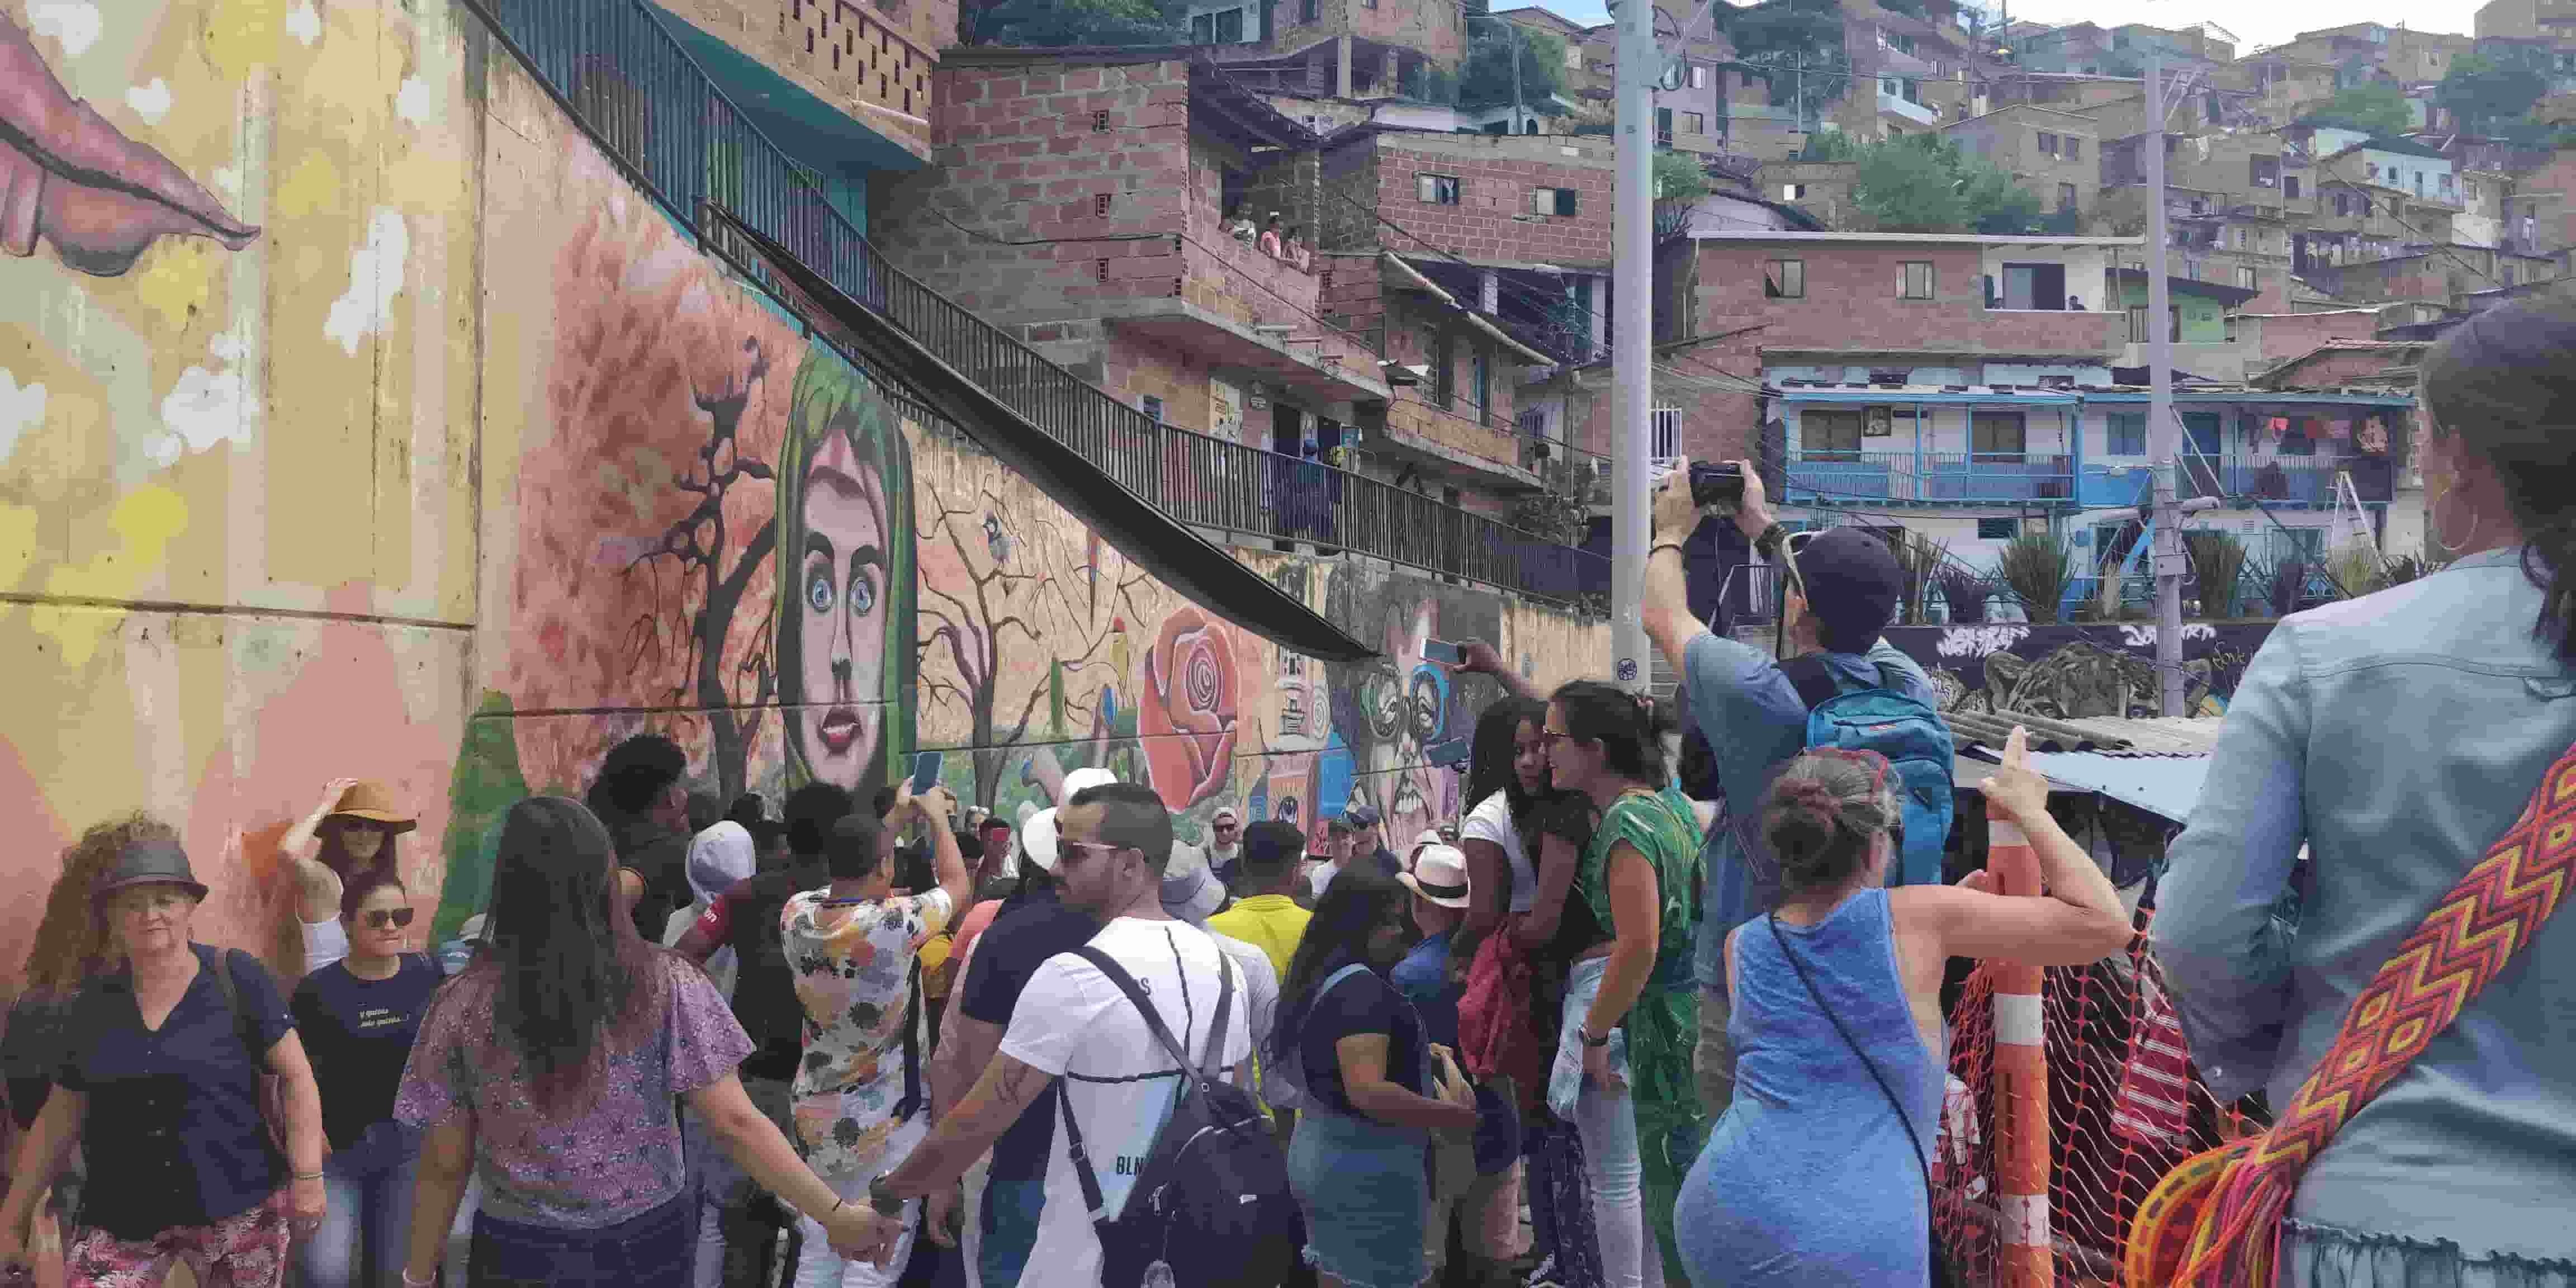 crowds in the barrio to check out the graffiti 